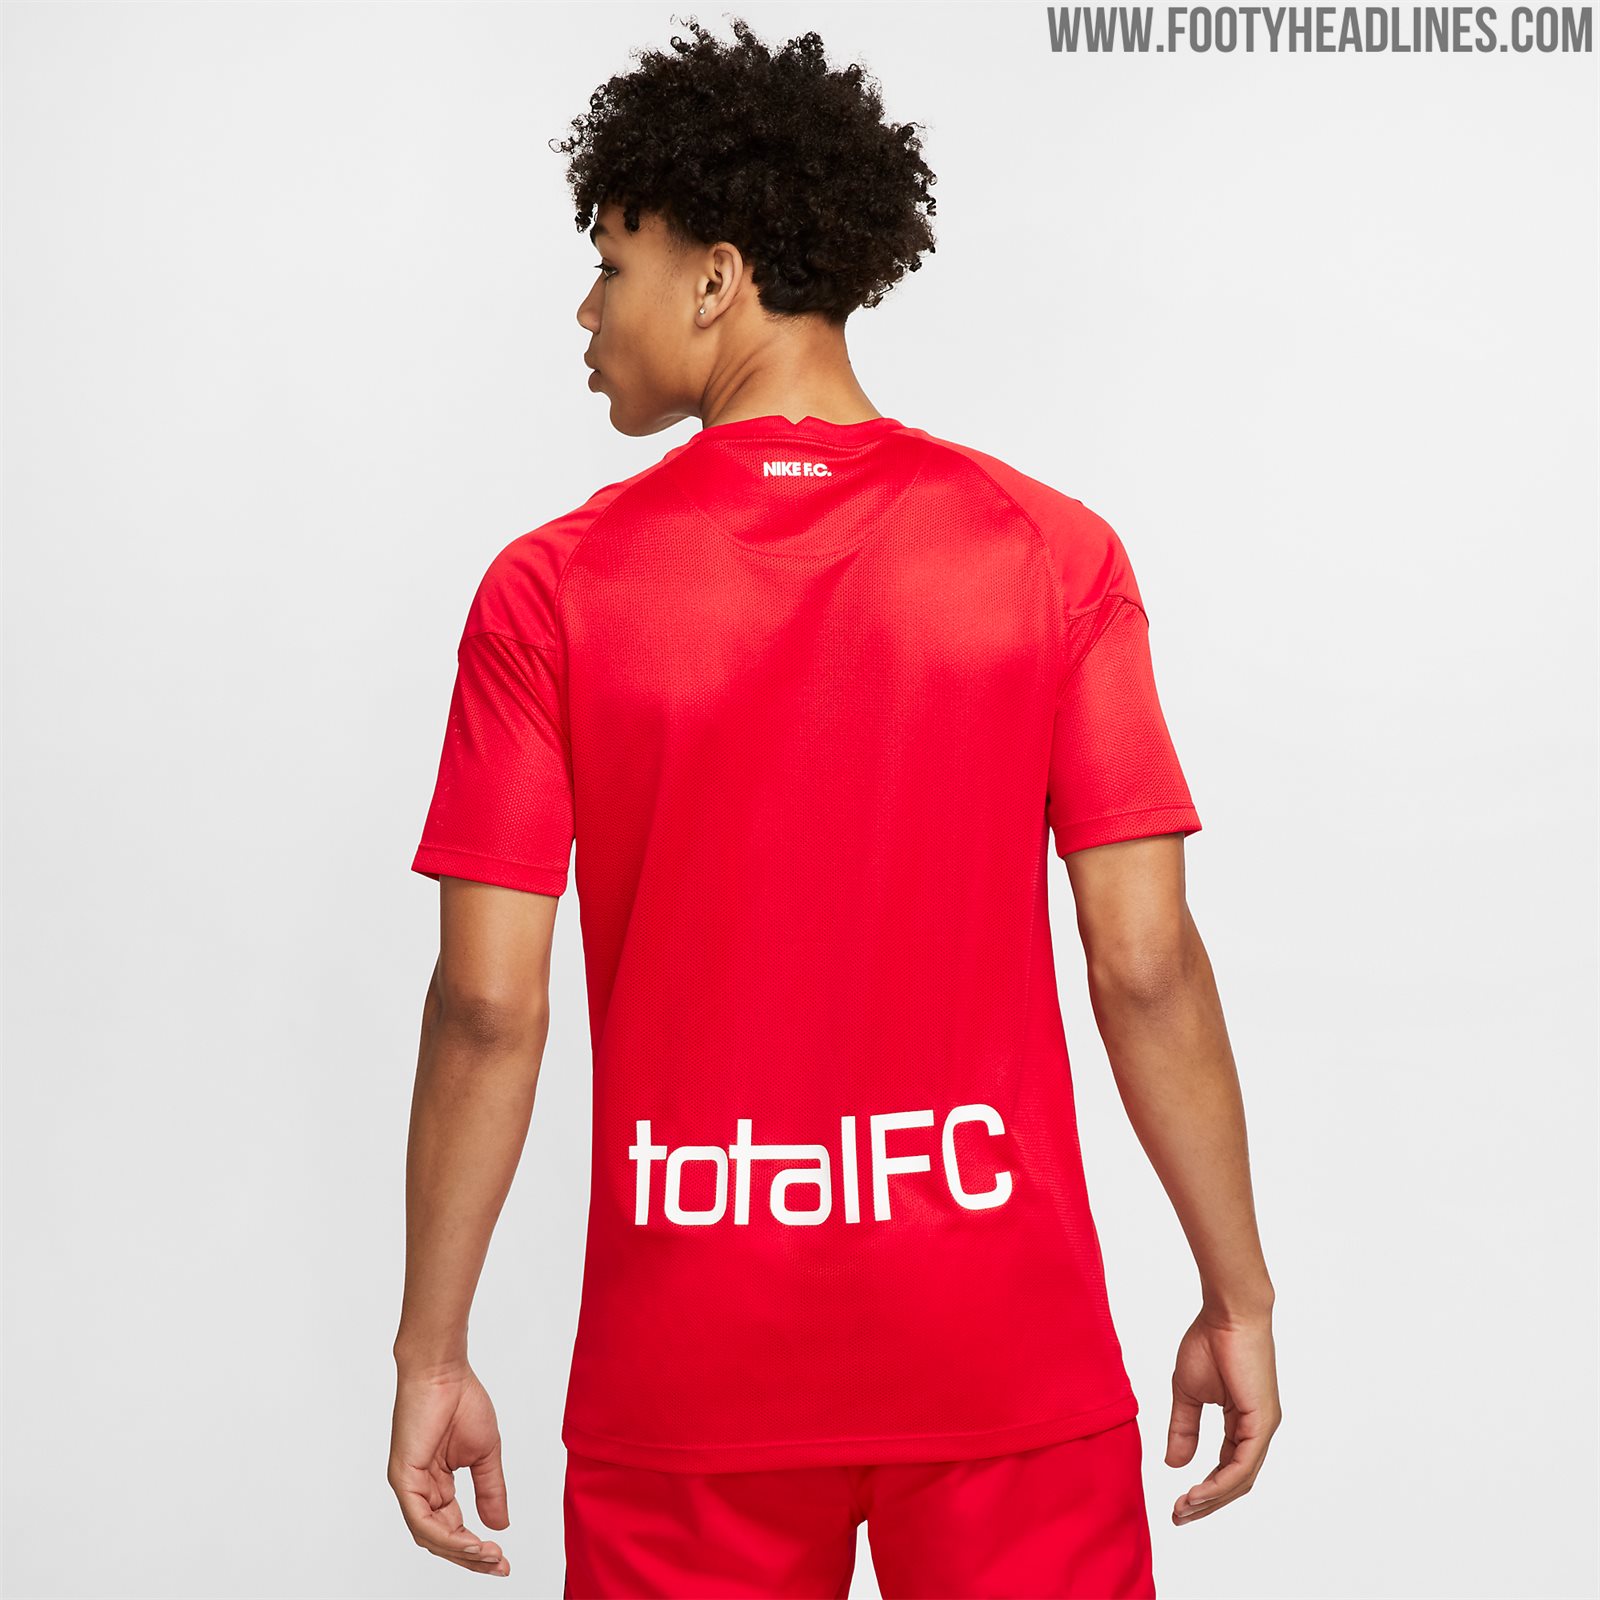 5 Spectacular Nike FC 2020 Kits Released - Inspired by 2004 Total 90 ...